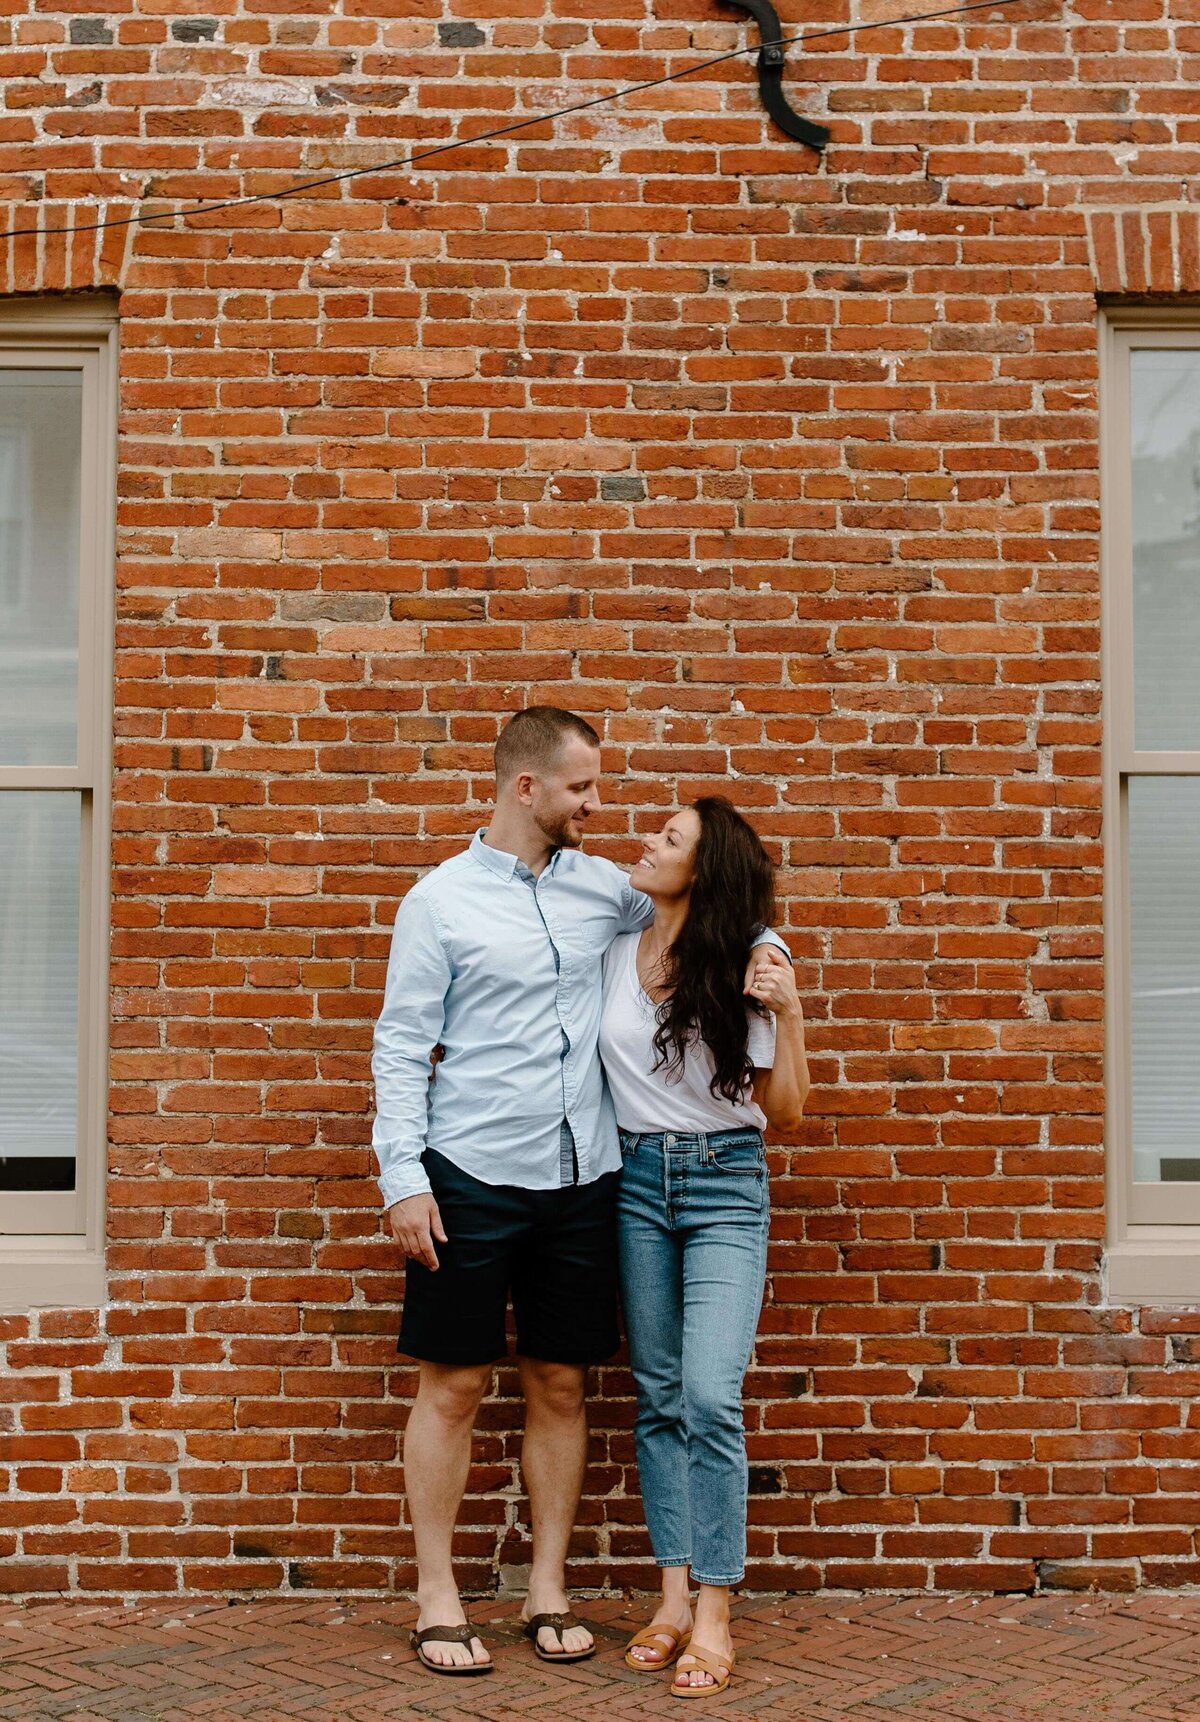 man puts arm around woman during engagement session in front of brick wall in baltimore maryland